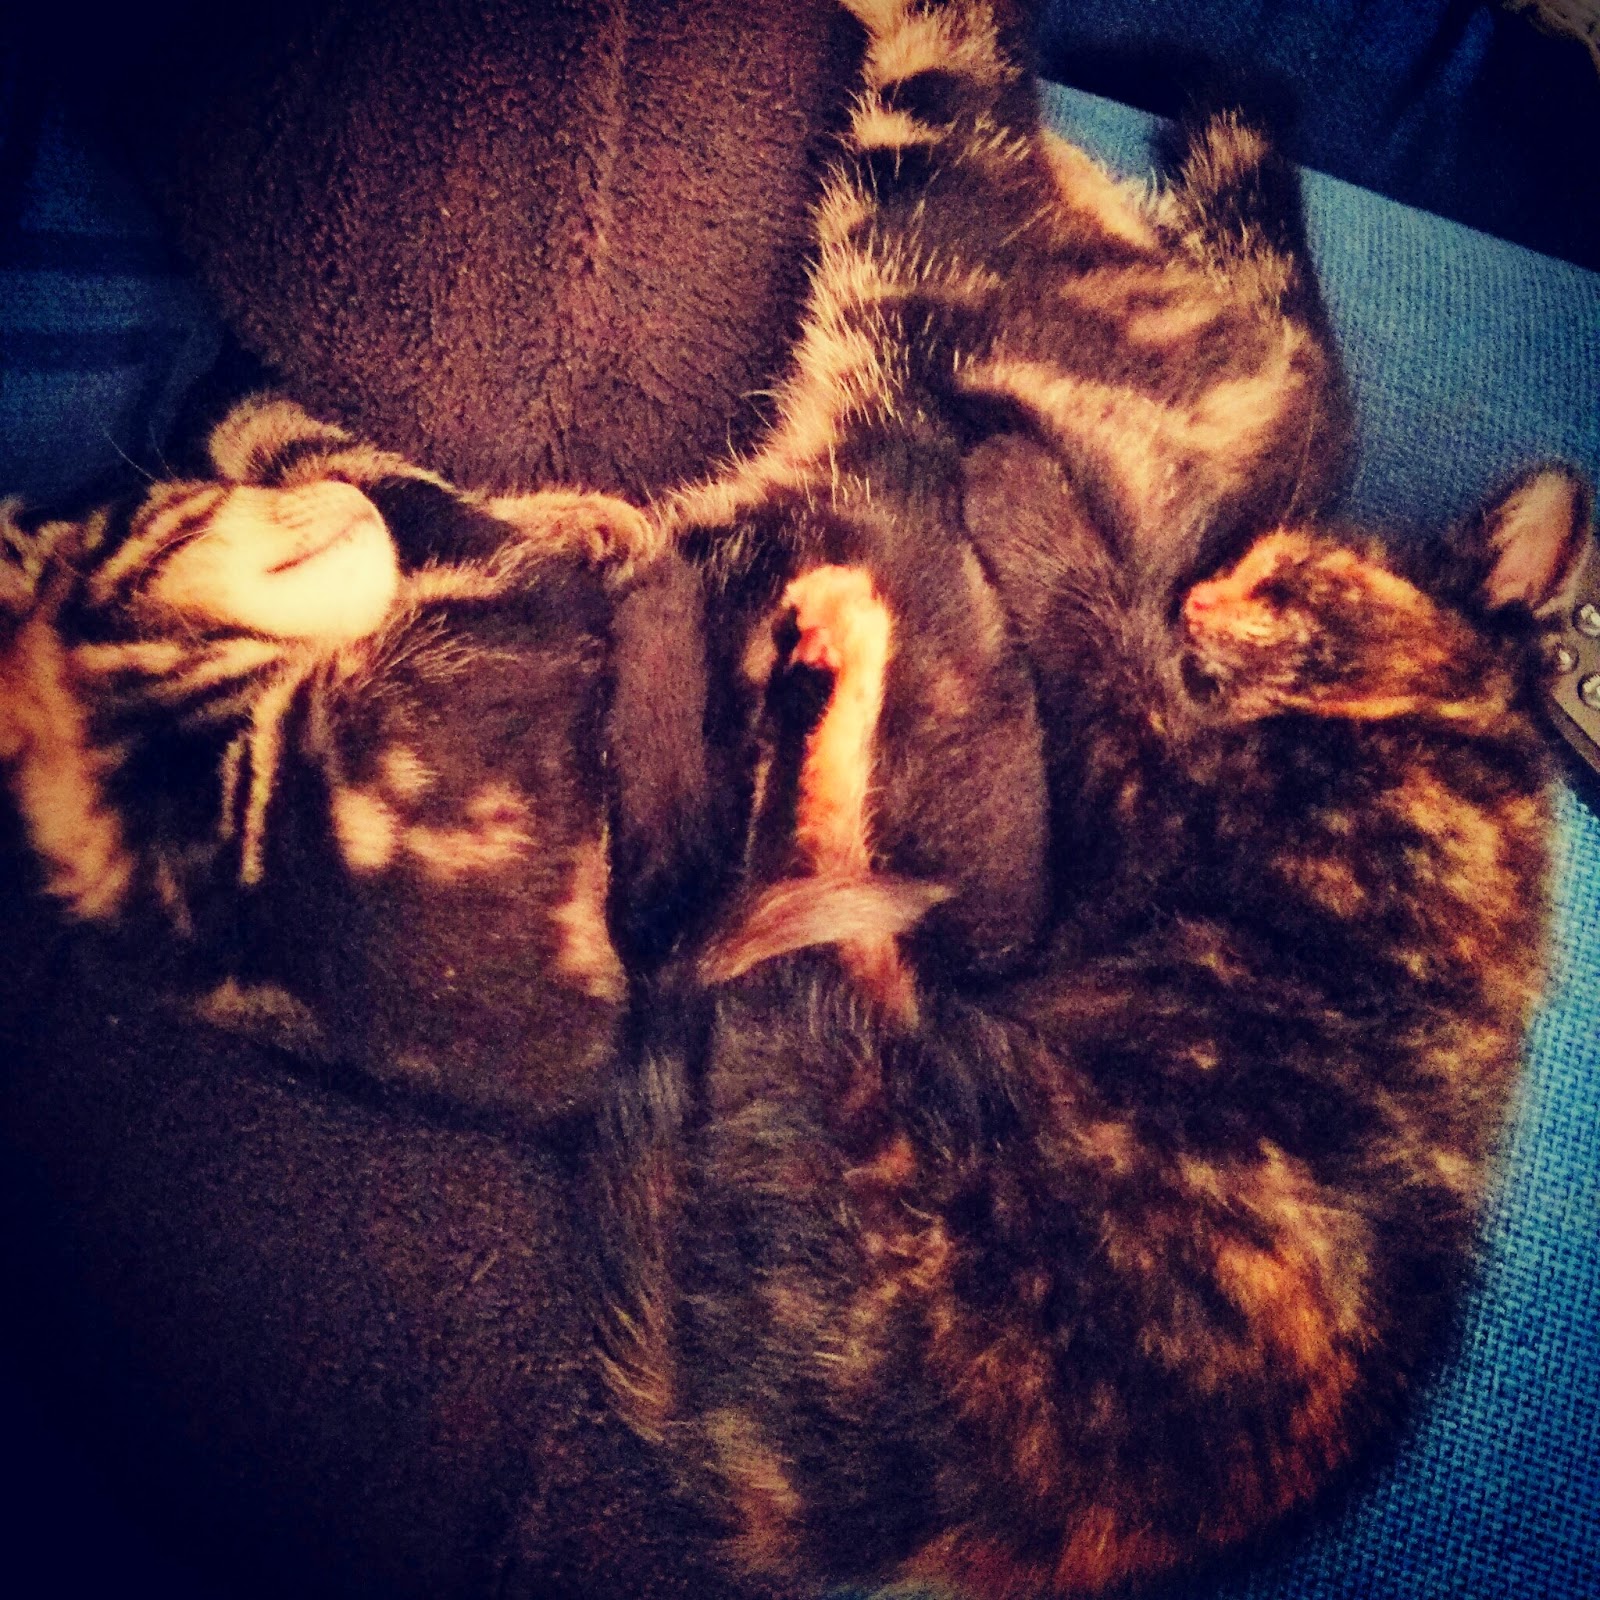 A tangle of kittens